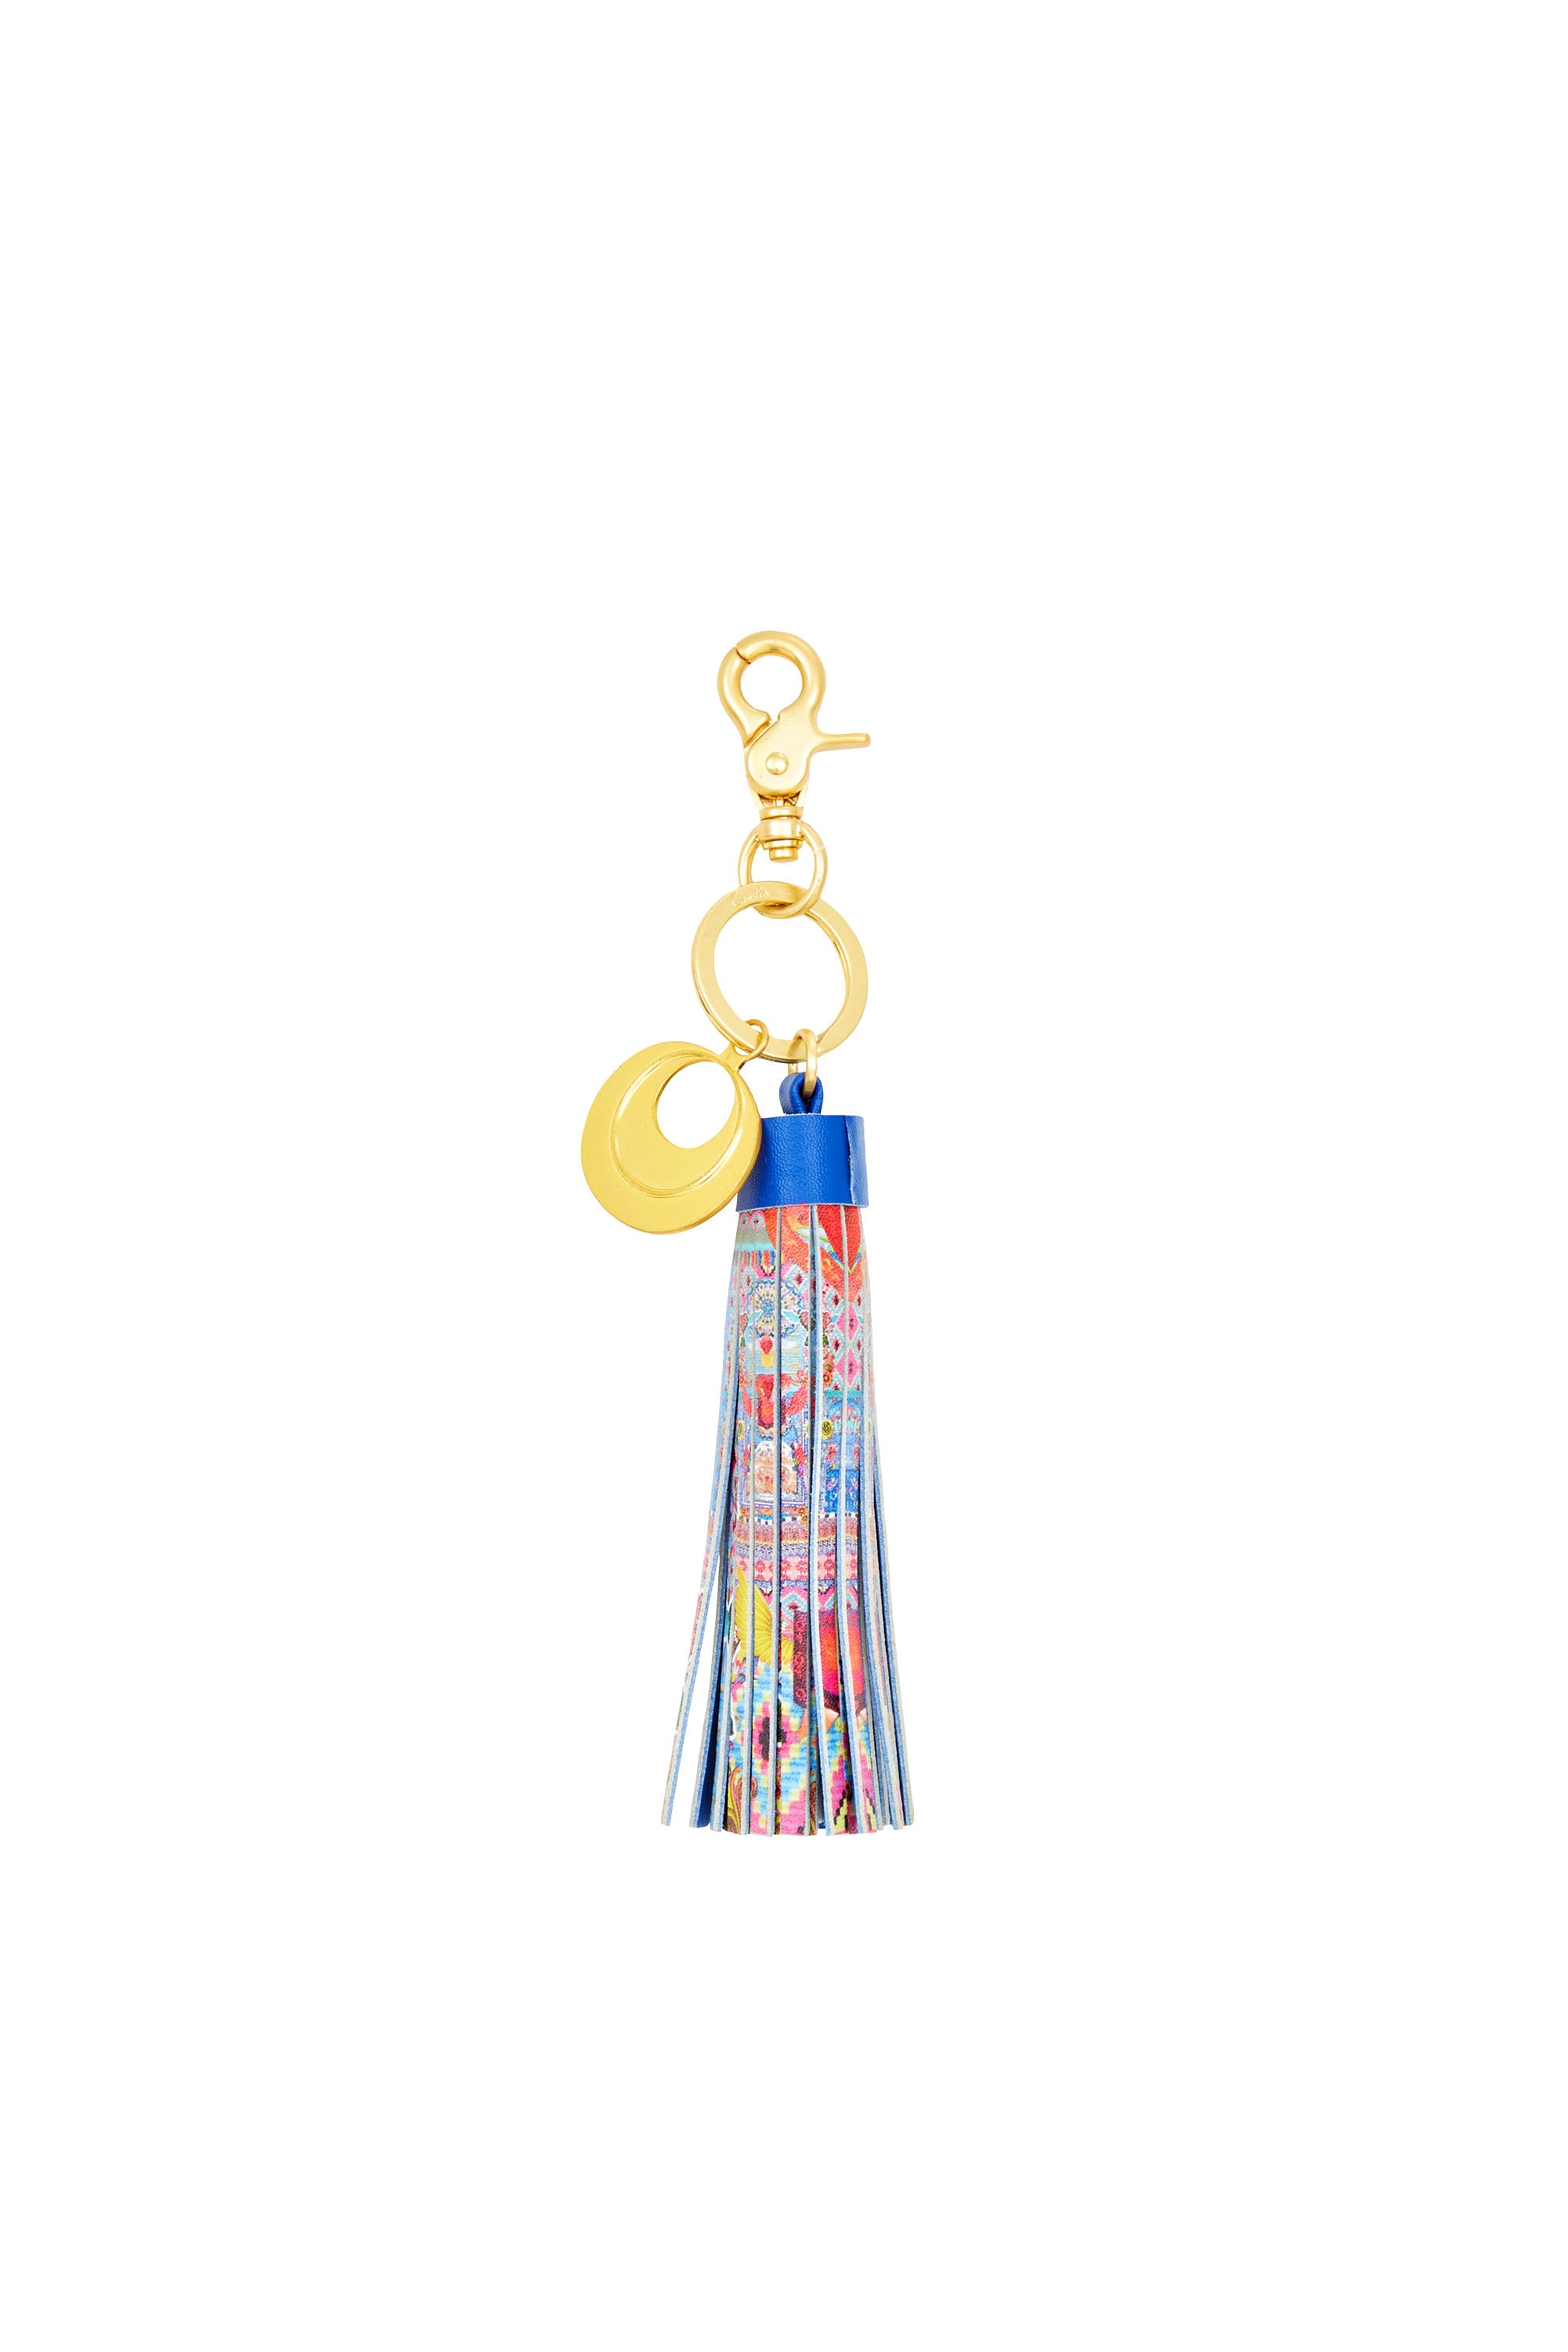 CLOSE TO MY HEART SHORT LEATHER TASSEL KEY RING